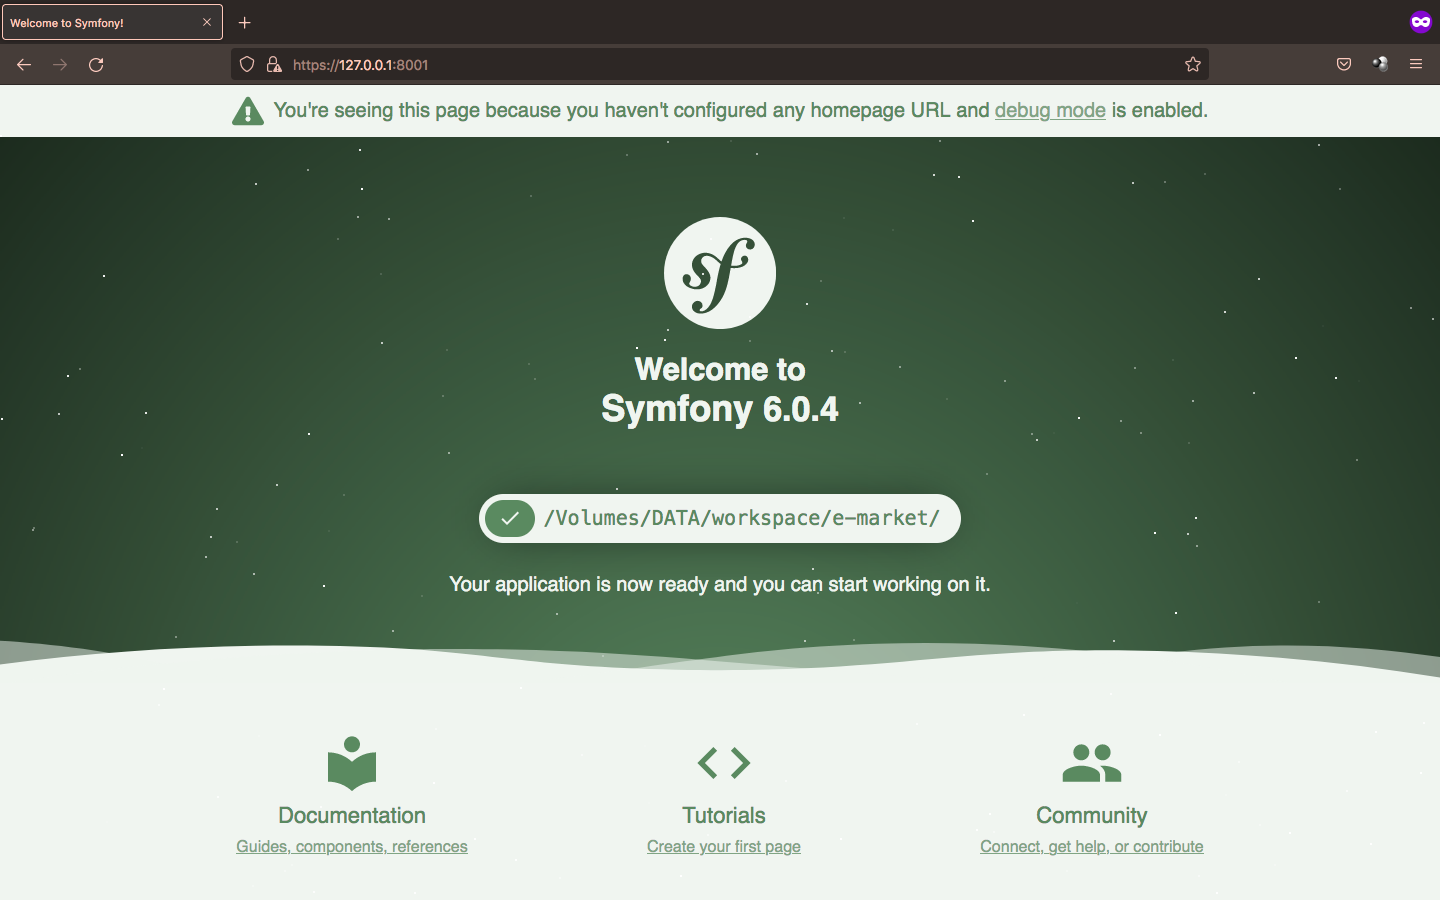 06-welcome-symfony.png